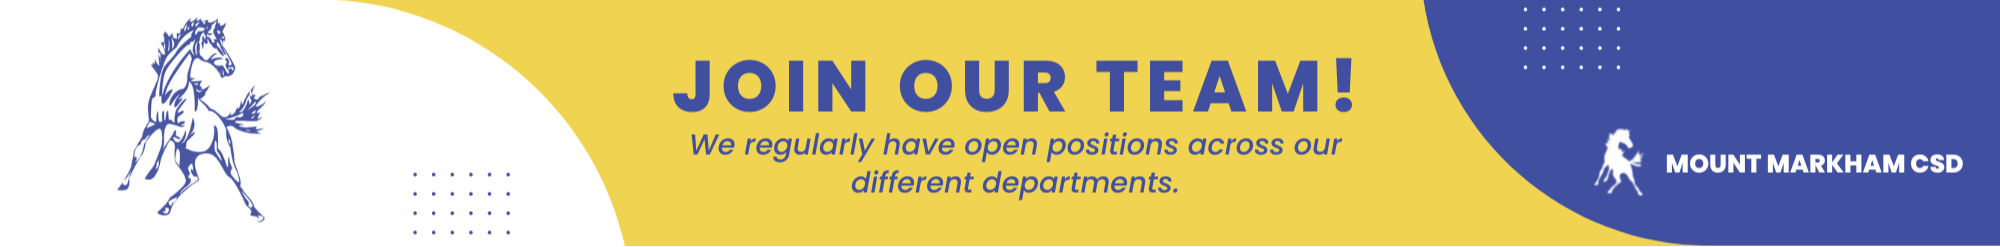 Join our team! We regularly have open positions across our different departments 